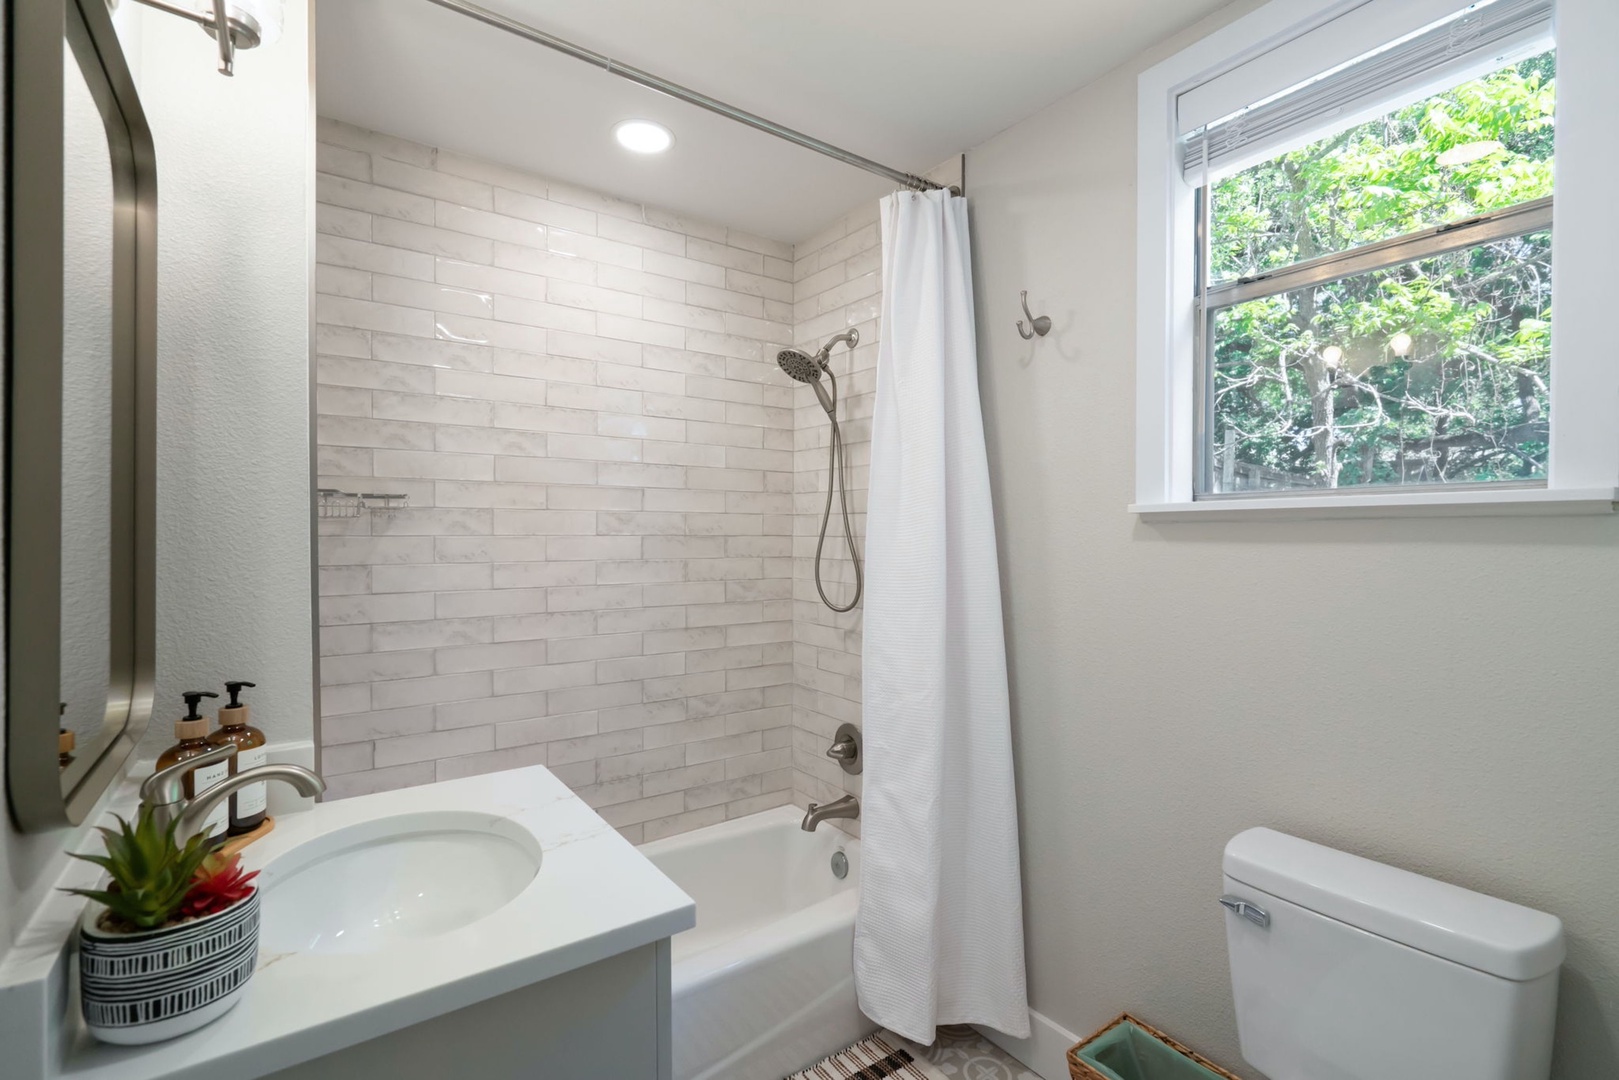 The Studio’s chic full bathroom features a single vanity & shower/tub combo